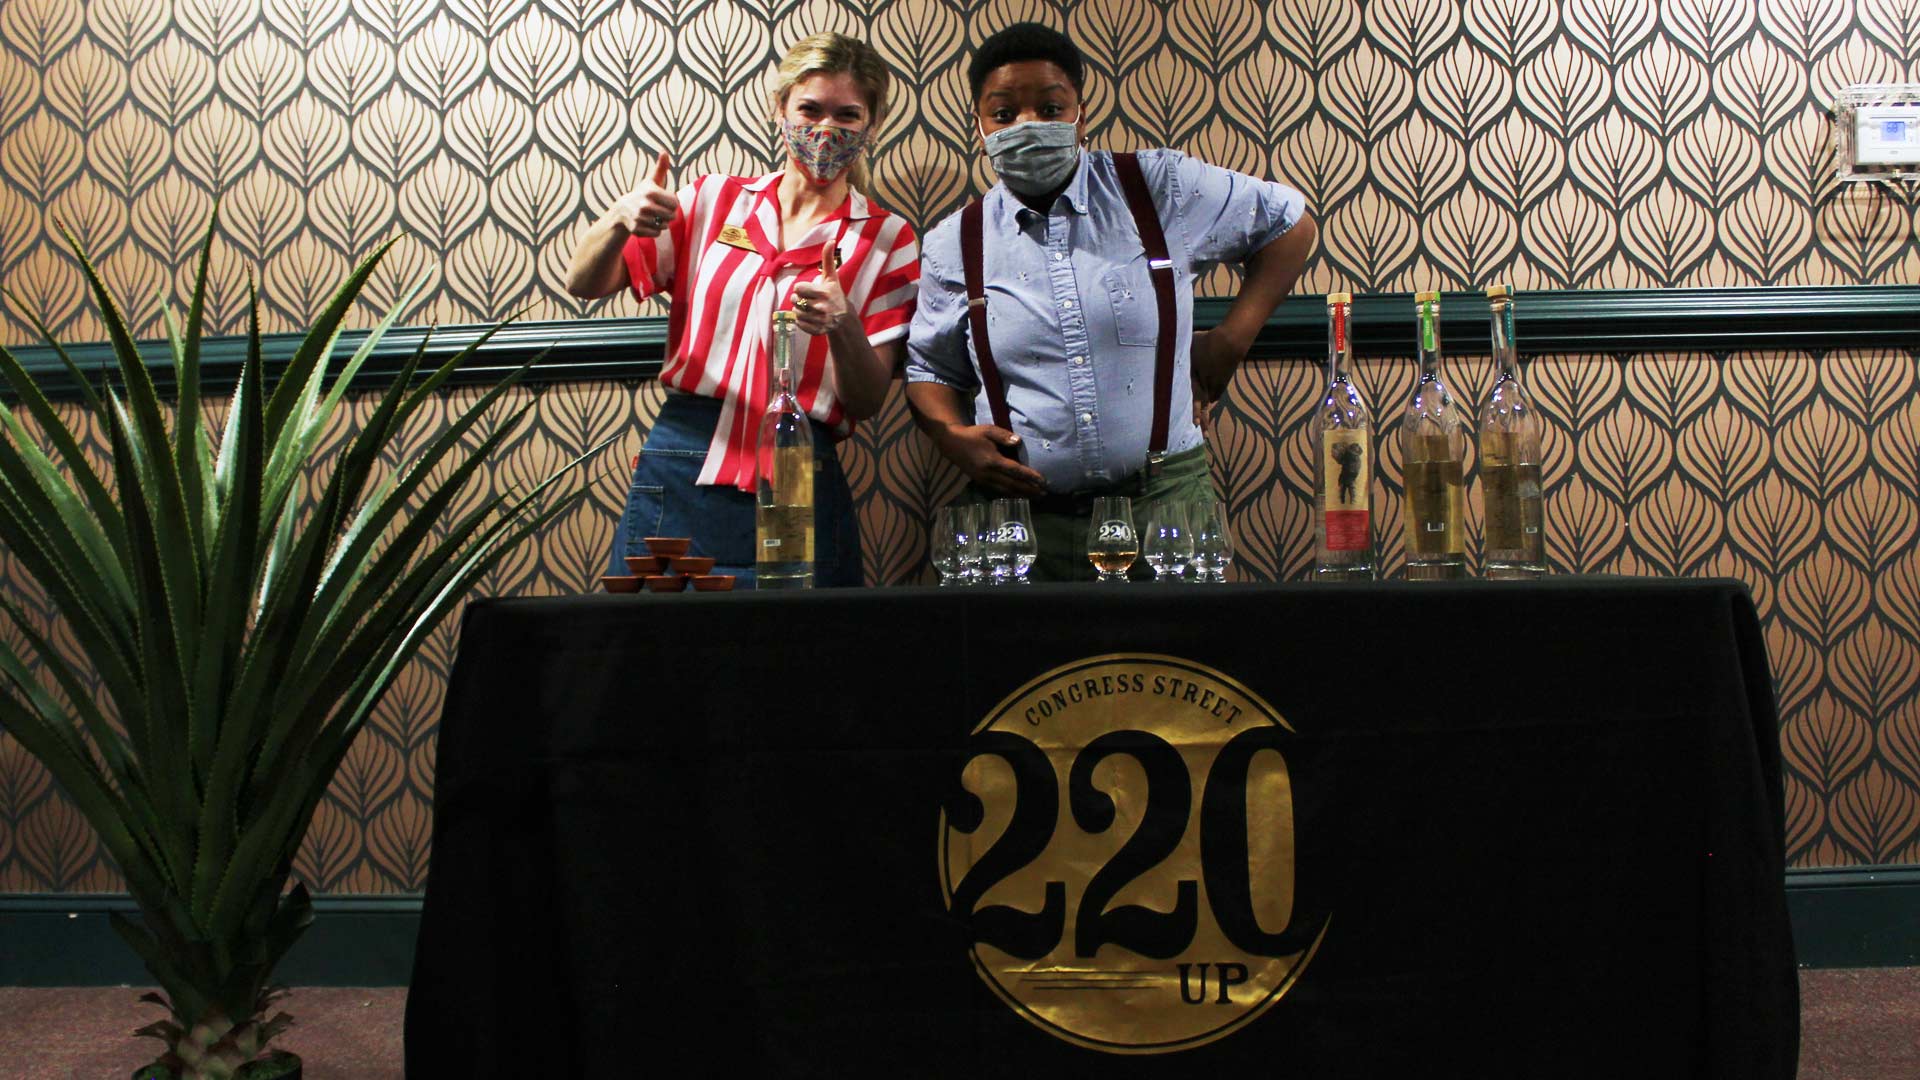 Bartenders serving tequila in Savannah at congress street up